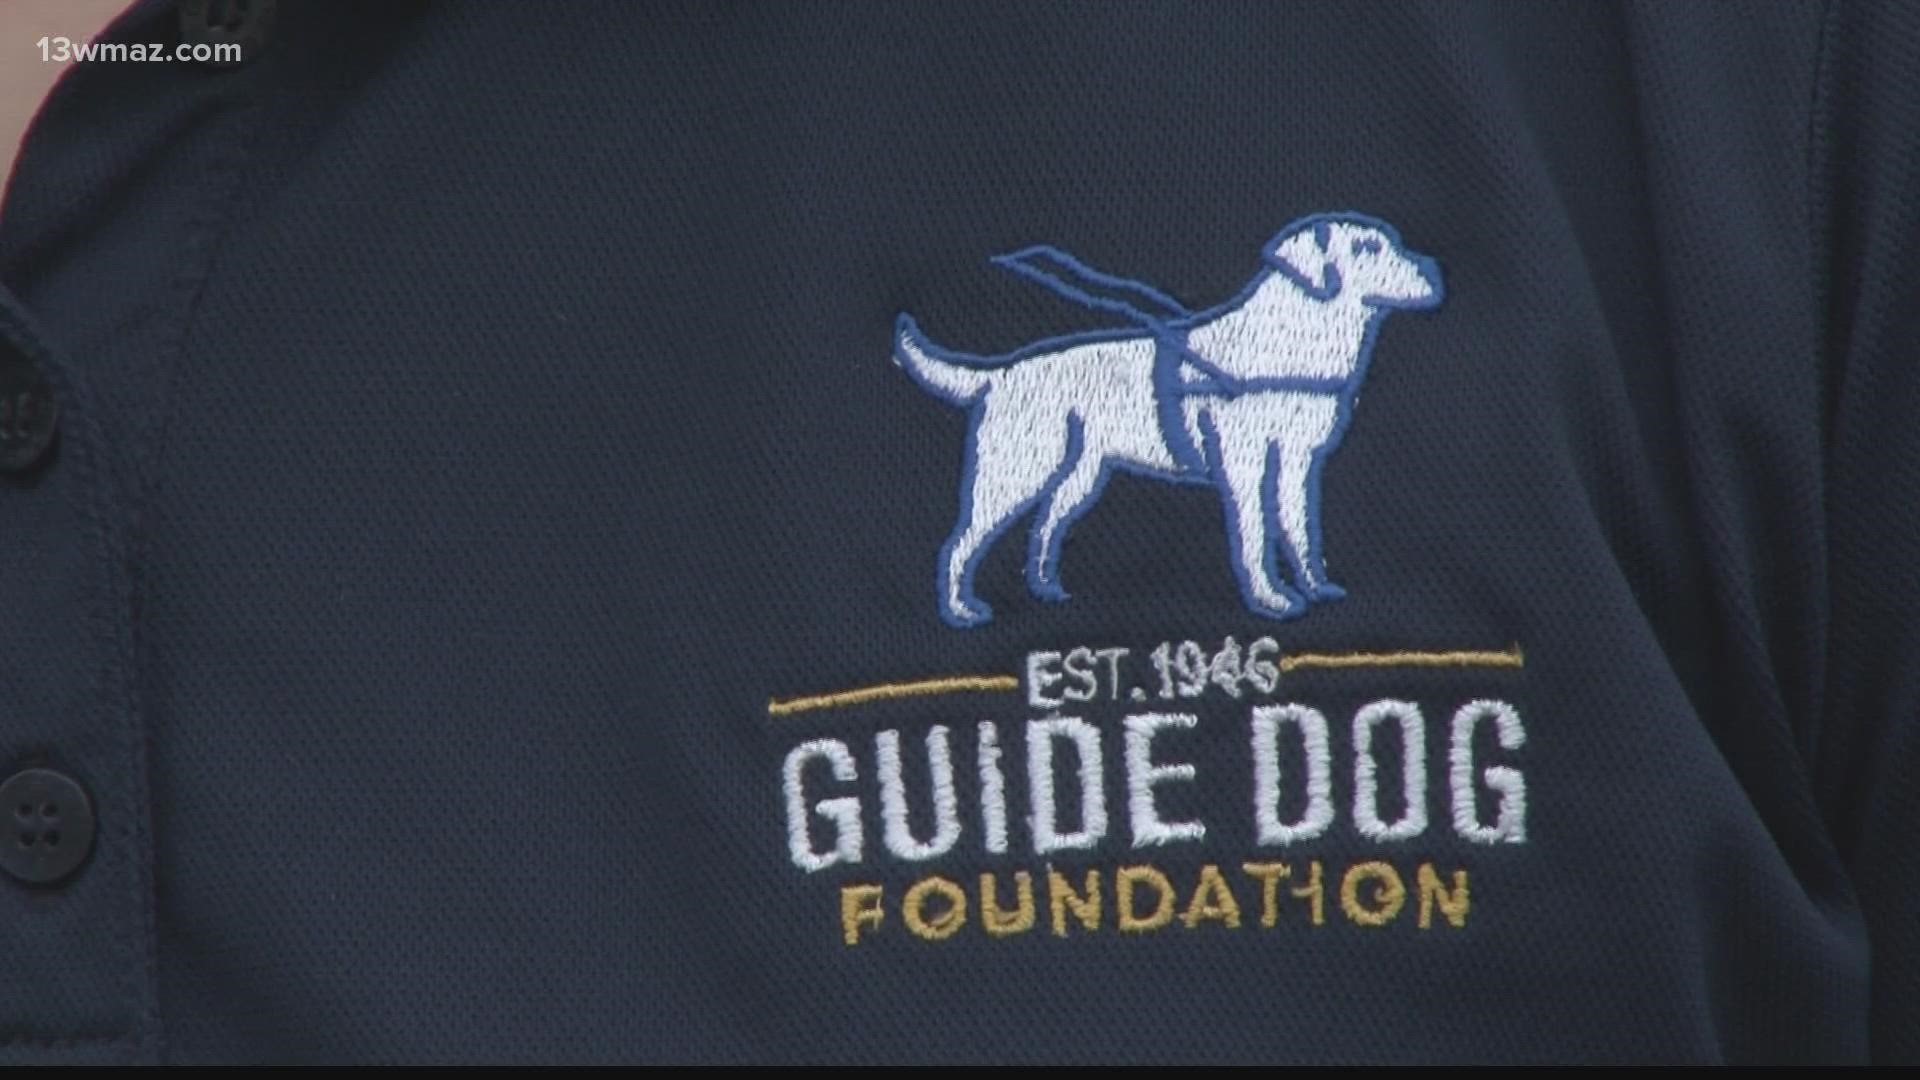 The guide dog foundation spent over 70 years providing service and guide dogs to assist people in their daily lives.